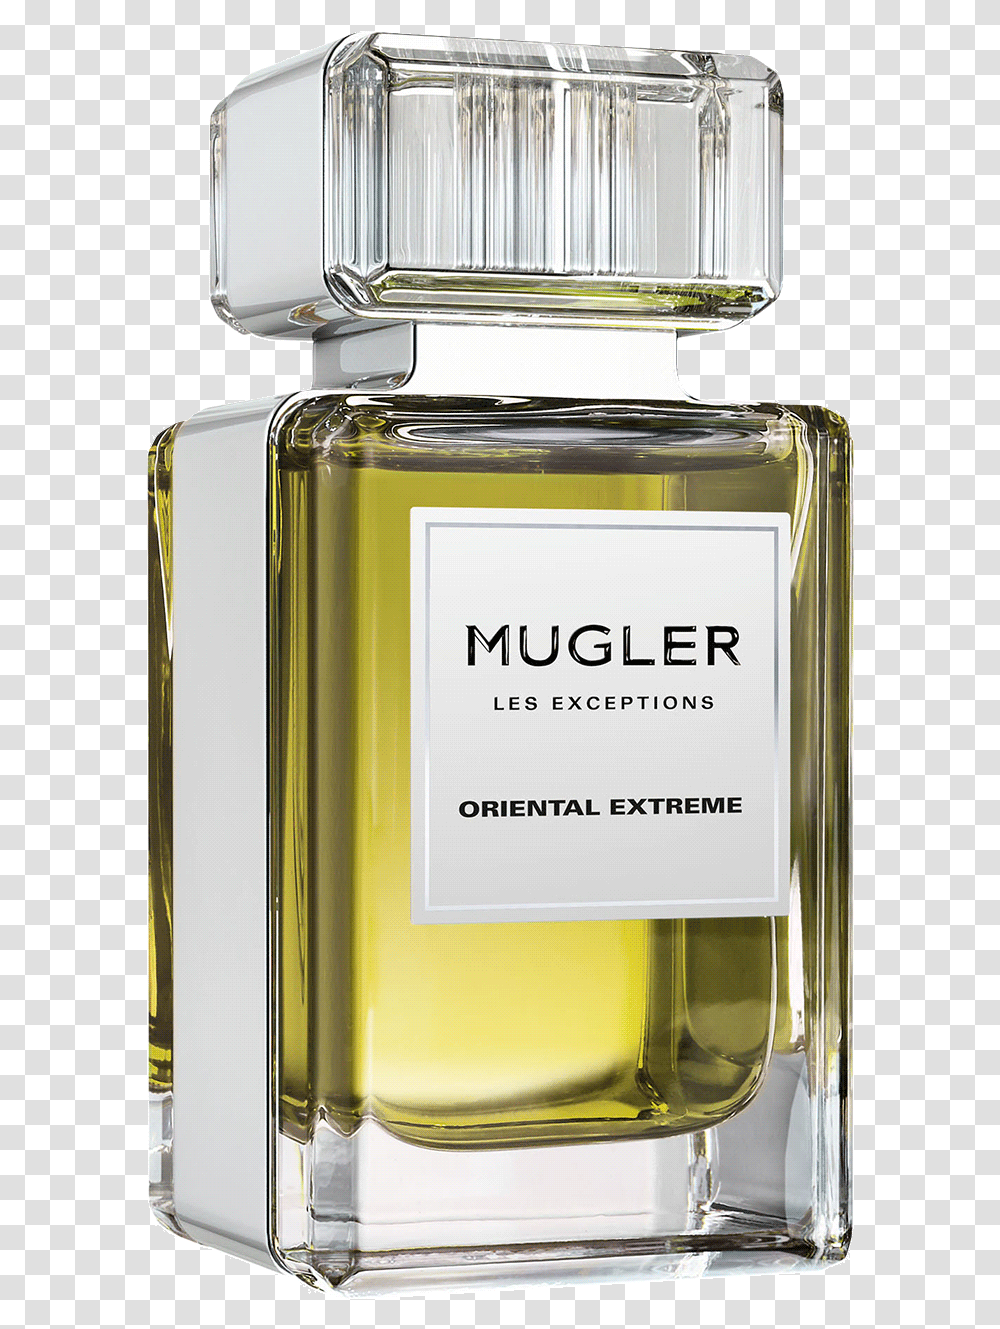 Les Exceptions Oriental Express Mugler Perfume Les Exceptions, Bottle, Cosmetics, Refrigerator, Appliance Transparent Png